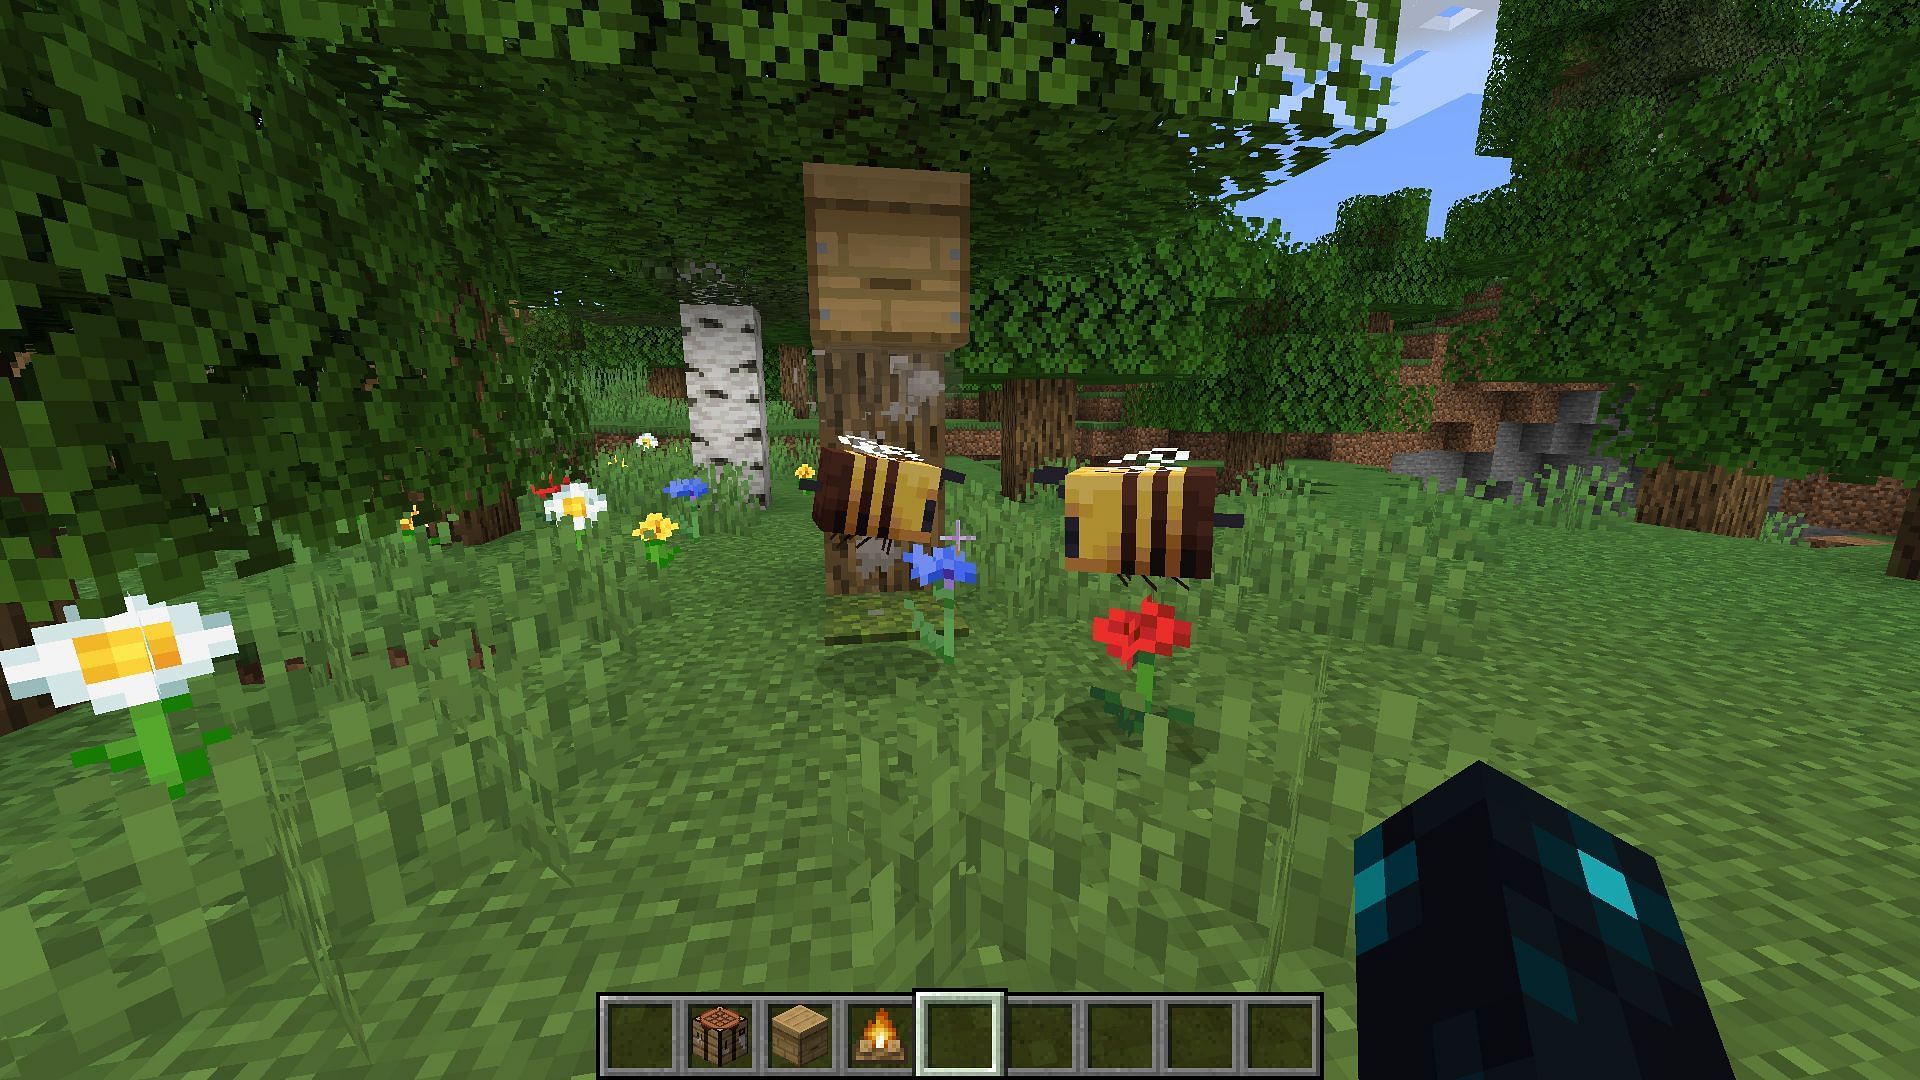 Bees hovering over flowers to get nectar and make honey inside beehive (Image via Minecraft 1.19)